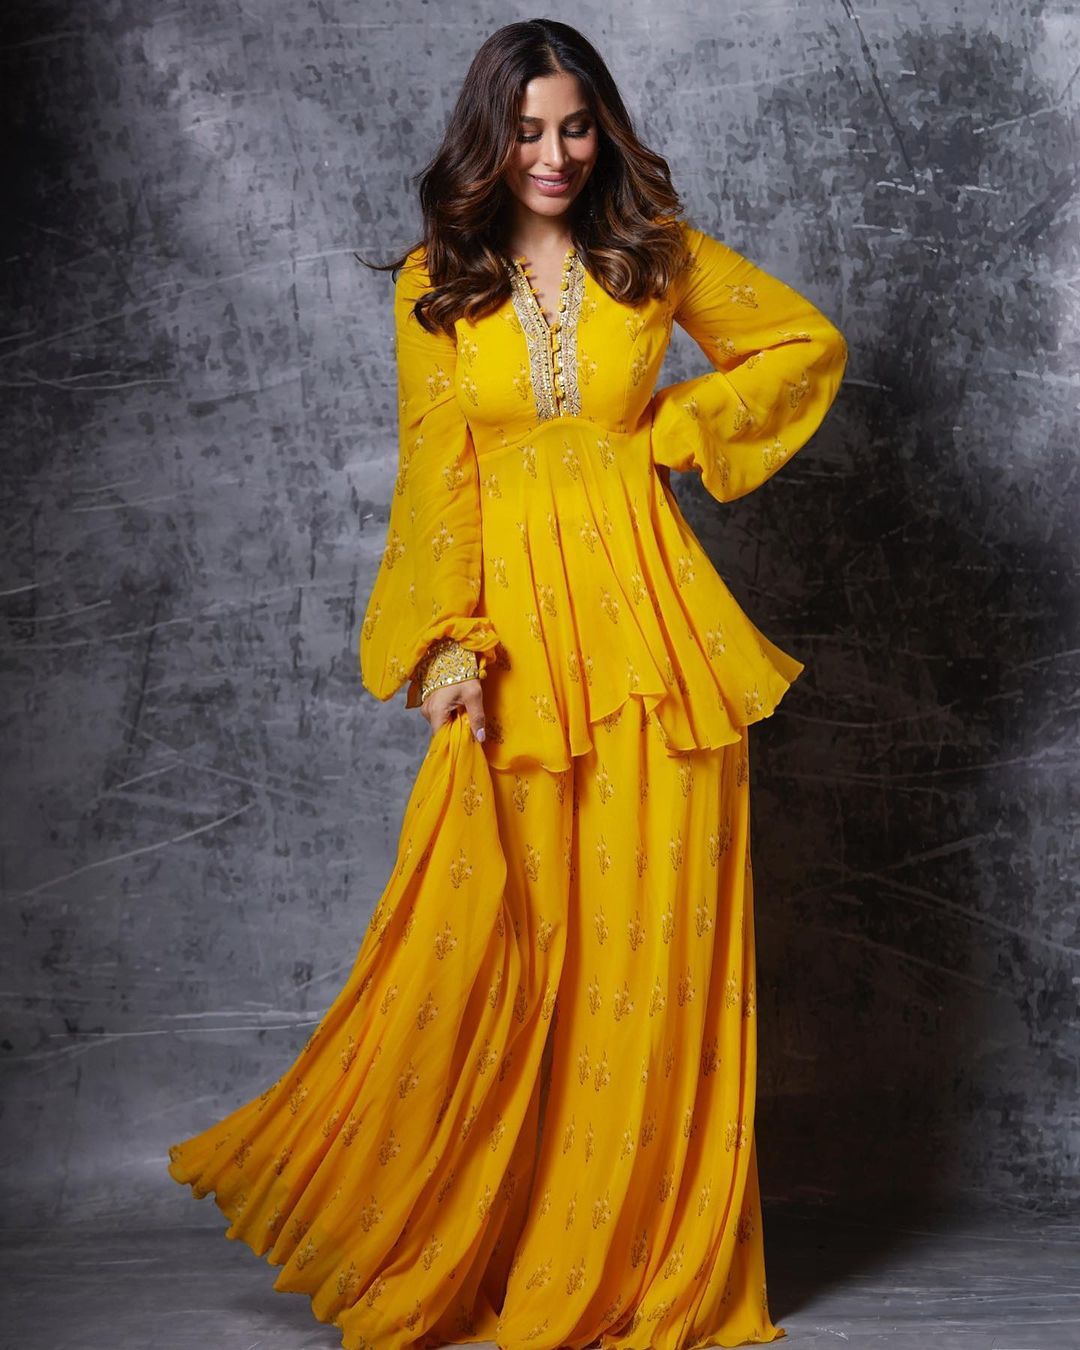 Sophie Choudry is giving major festive fashion goals with her yellow sharara.